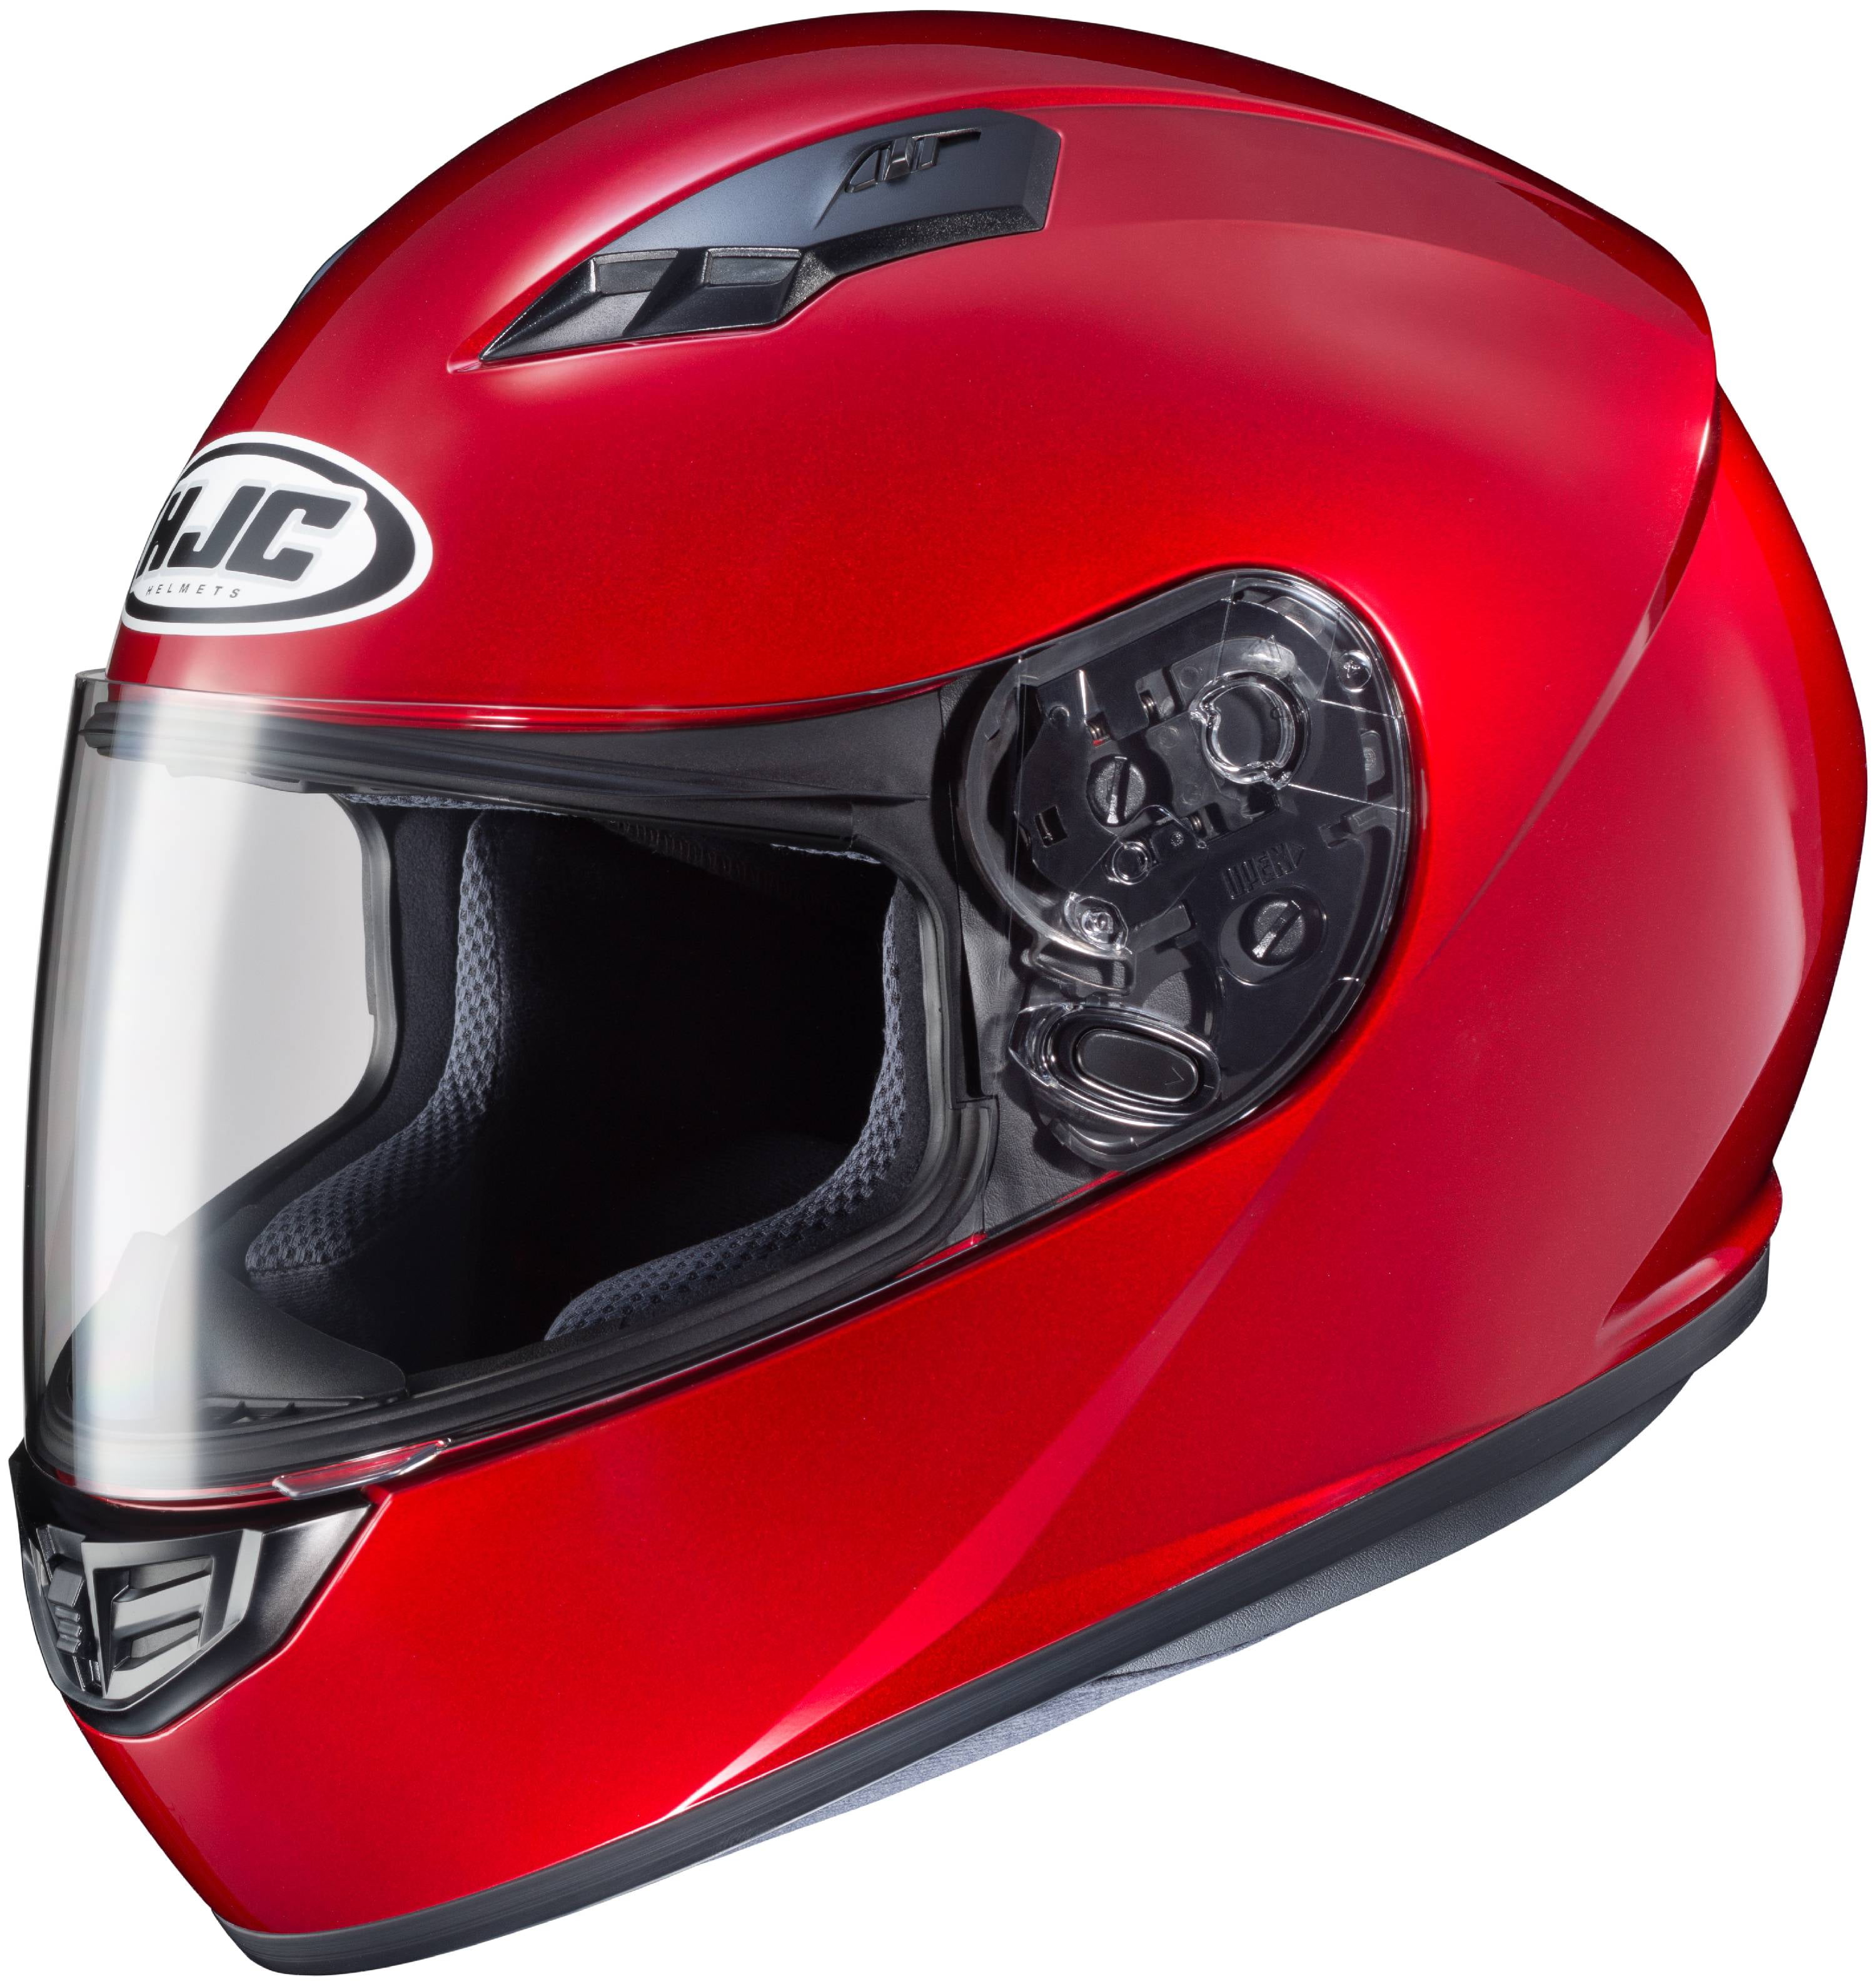 61cm T MT Adult Tribe Helmet Motorcycle Full Face Red/Black  Clearance XL 